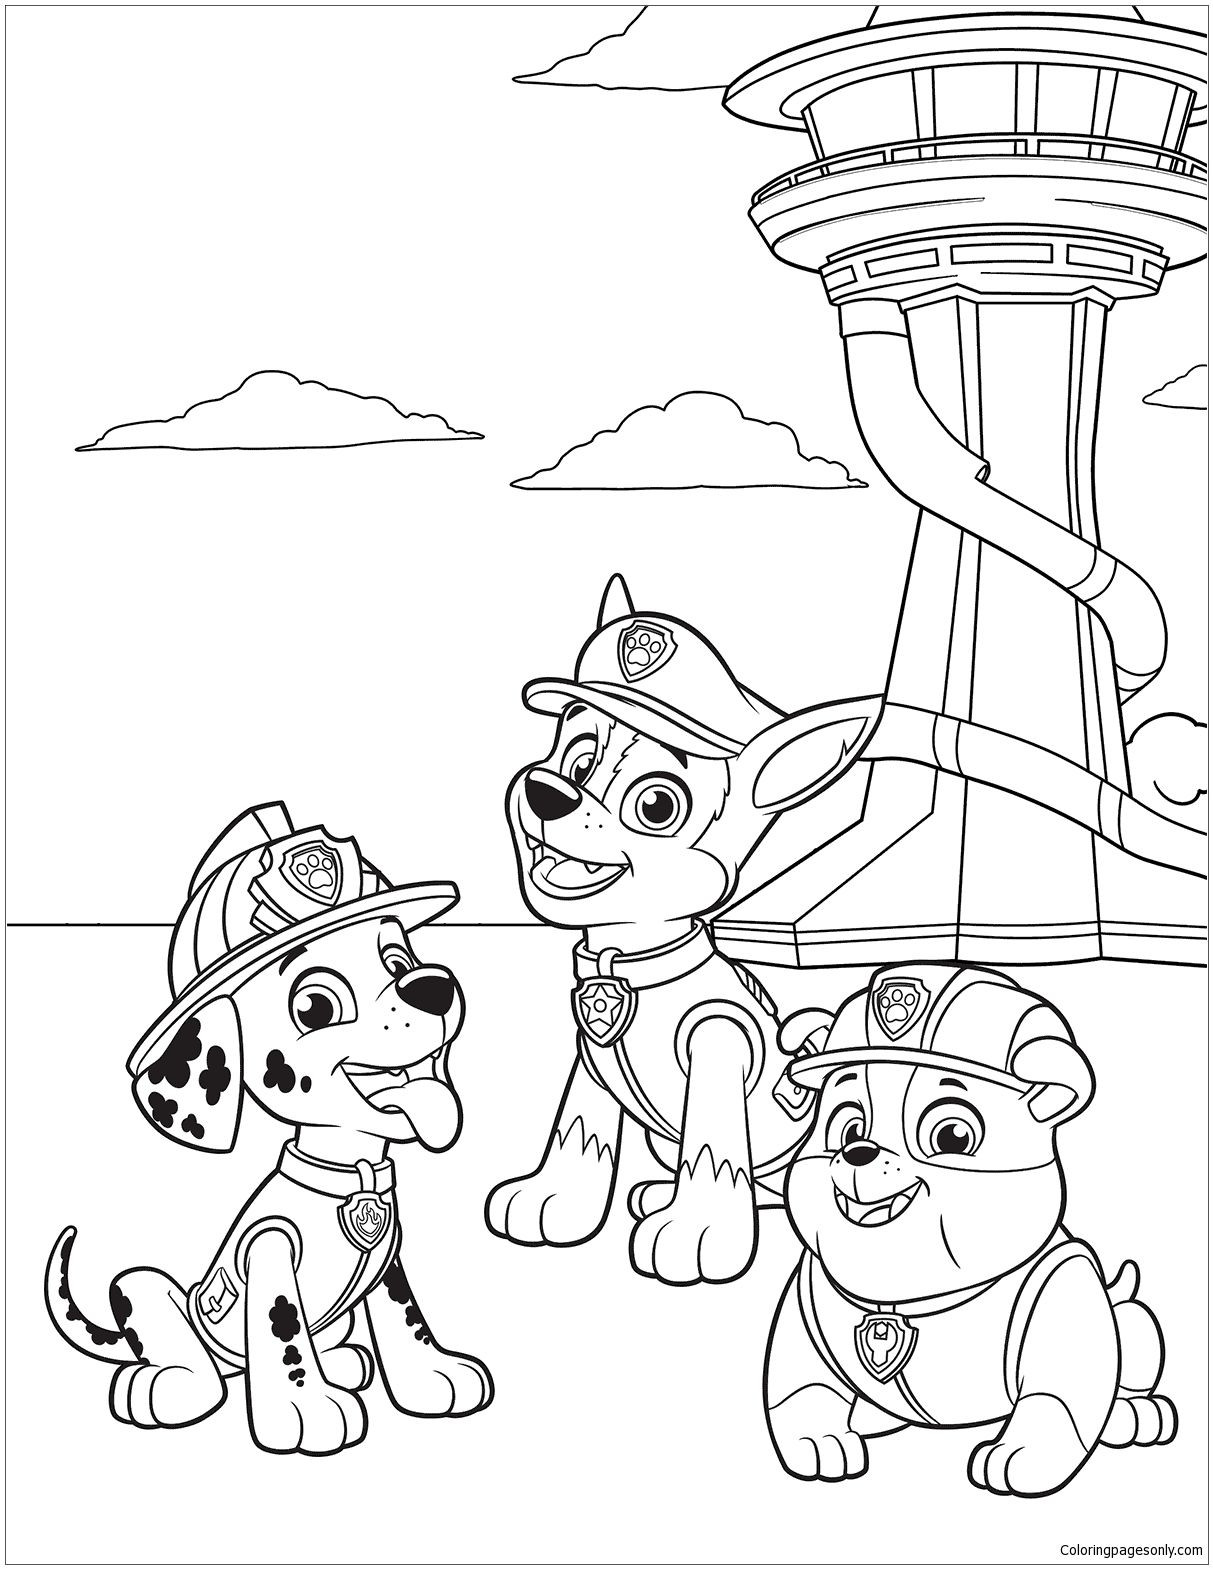 Paw Patrol Coloring Pages For Kids
 Paw Patrol 38 Coloring Page